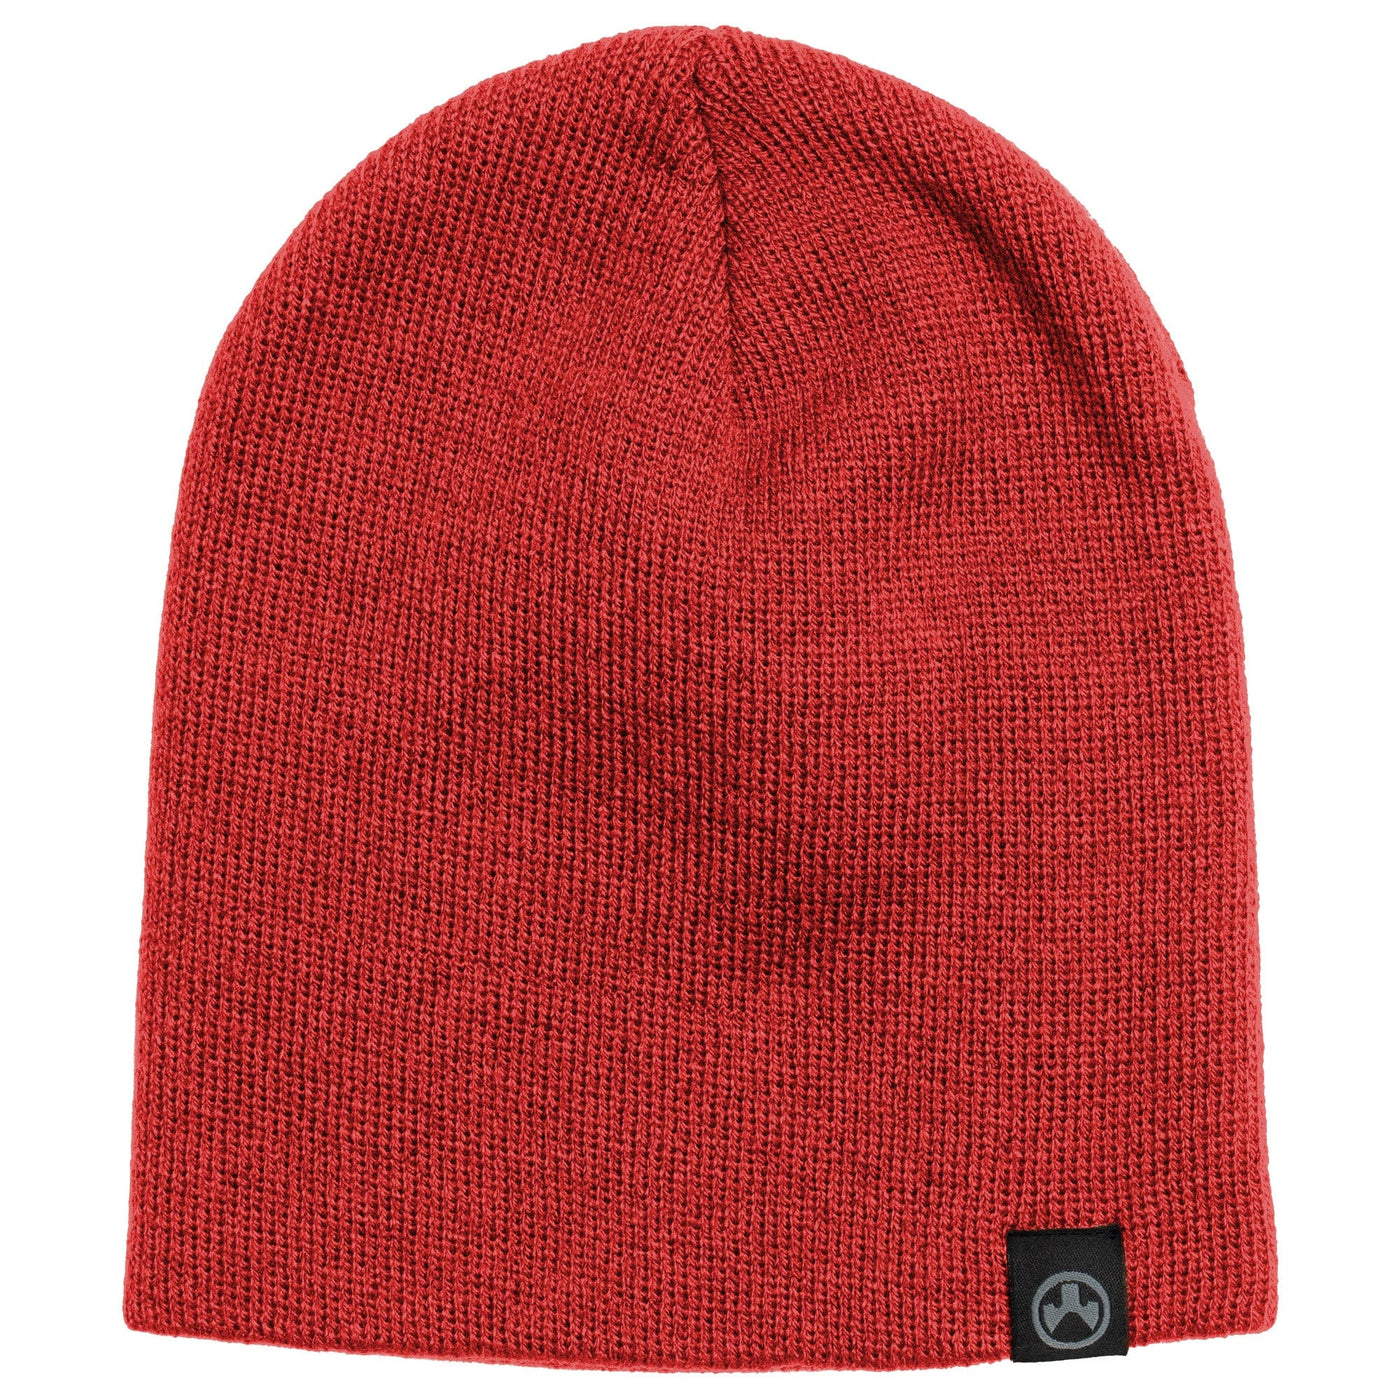 Magpul Industries Magpul Knit Beanie Red Clothing